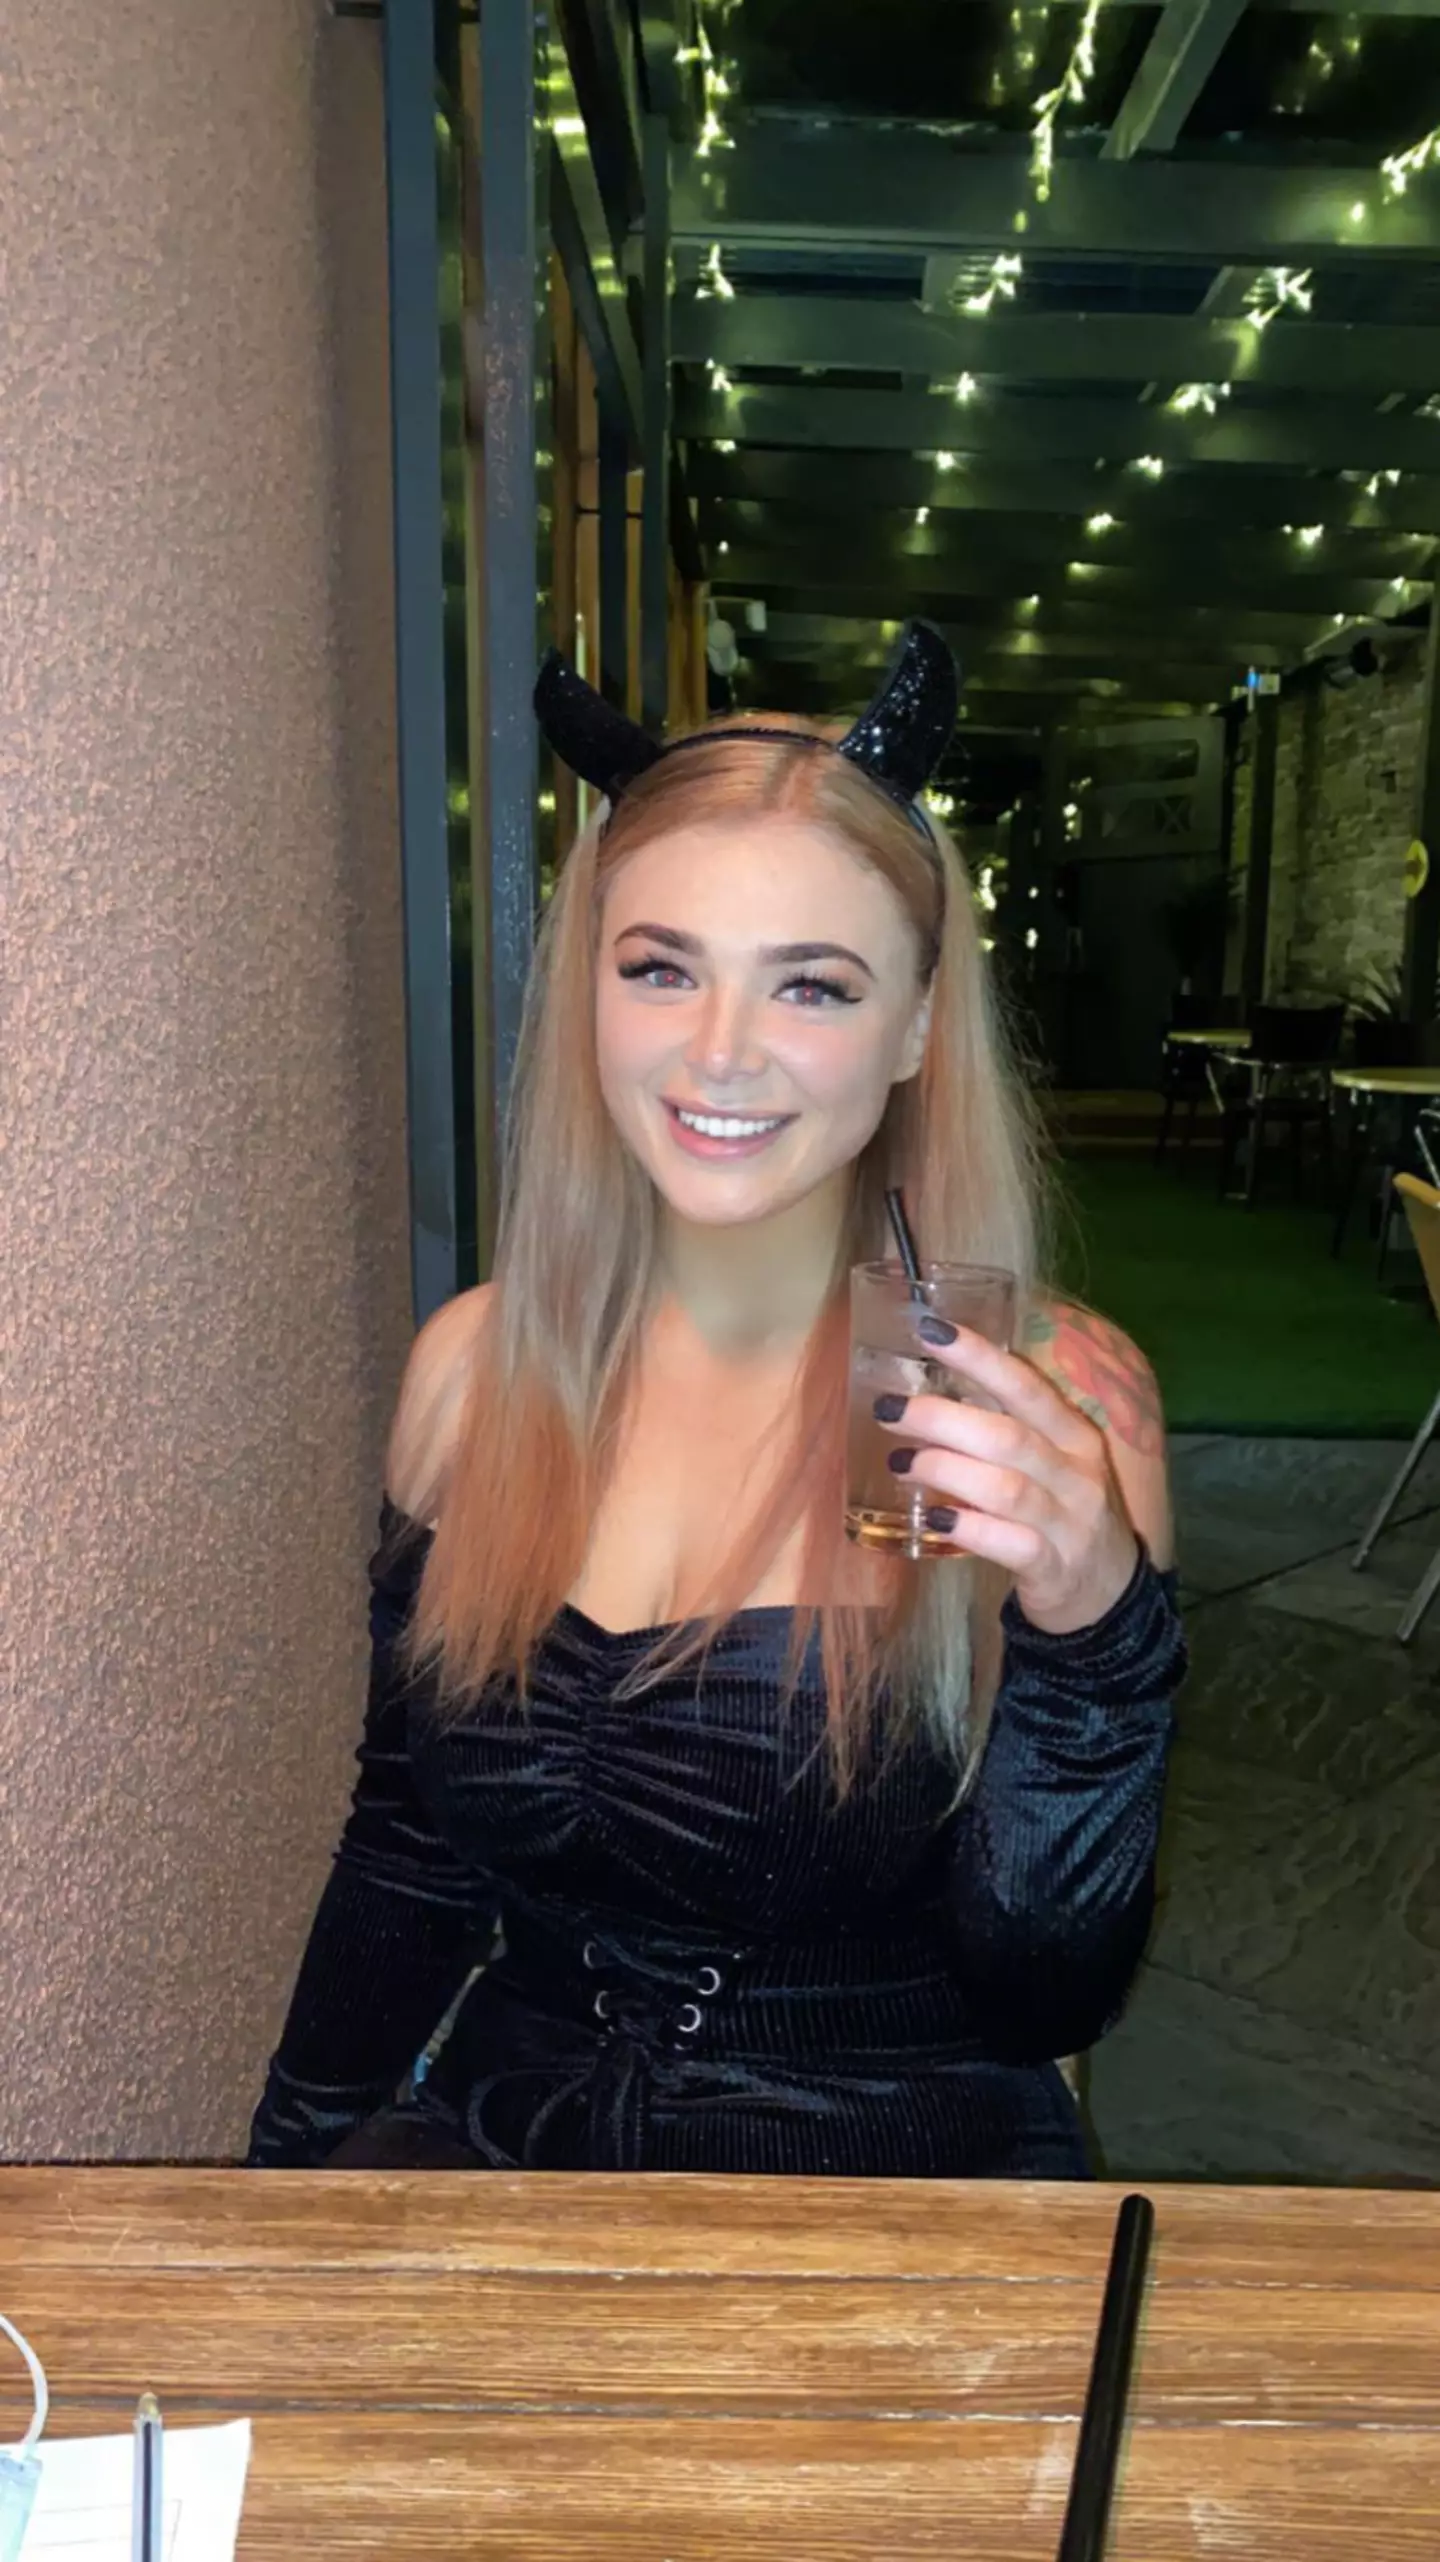 Kelsey Johnson was able to spend a staggering £500,000 in just one day thanks to her OnlyFans earnings.